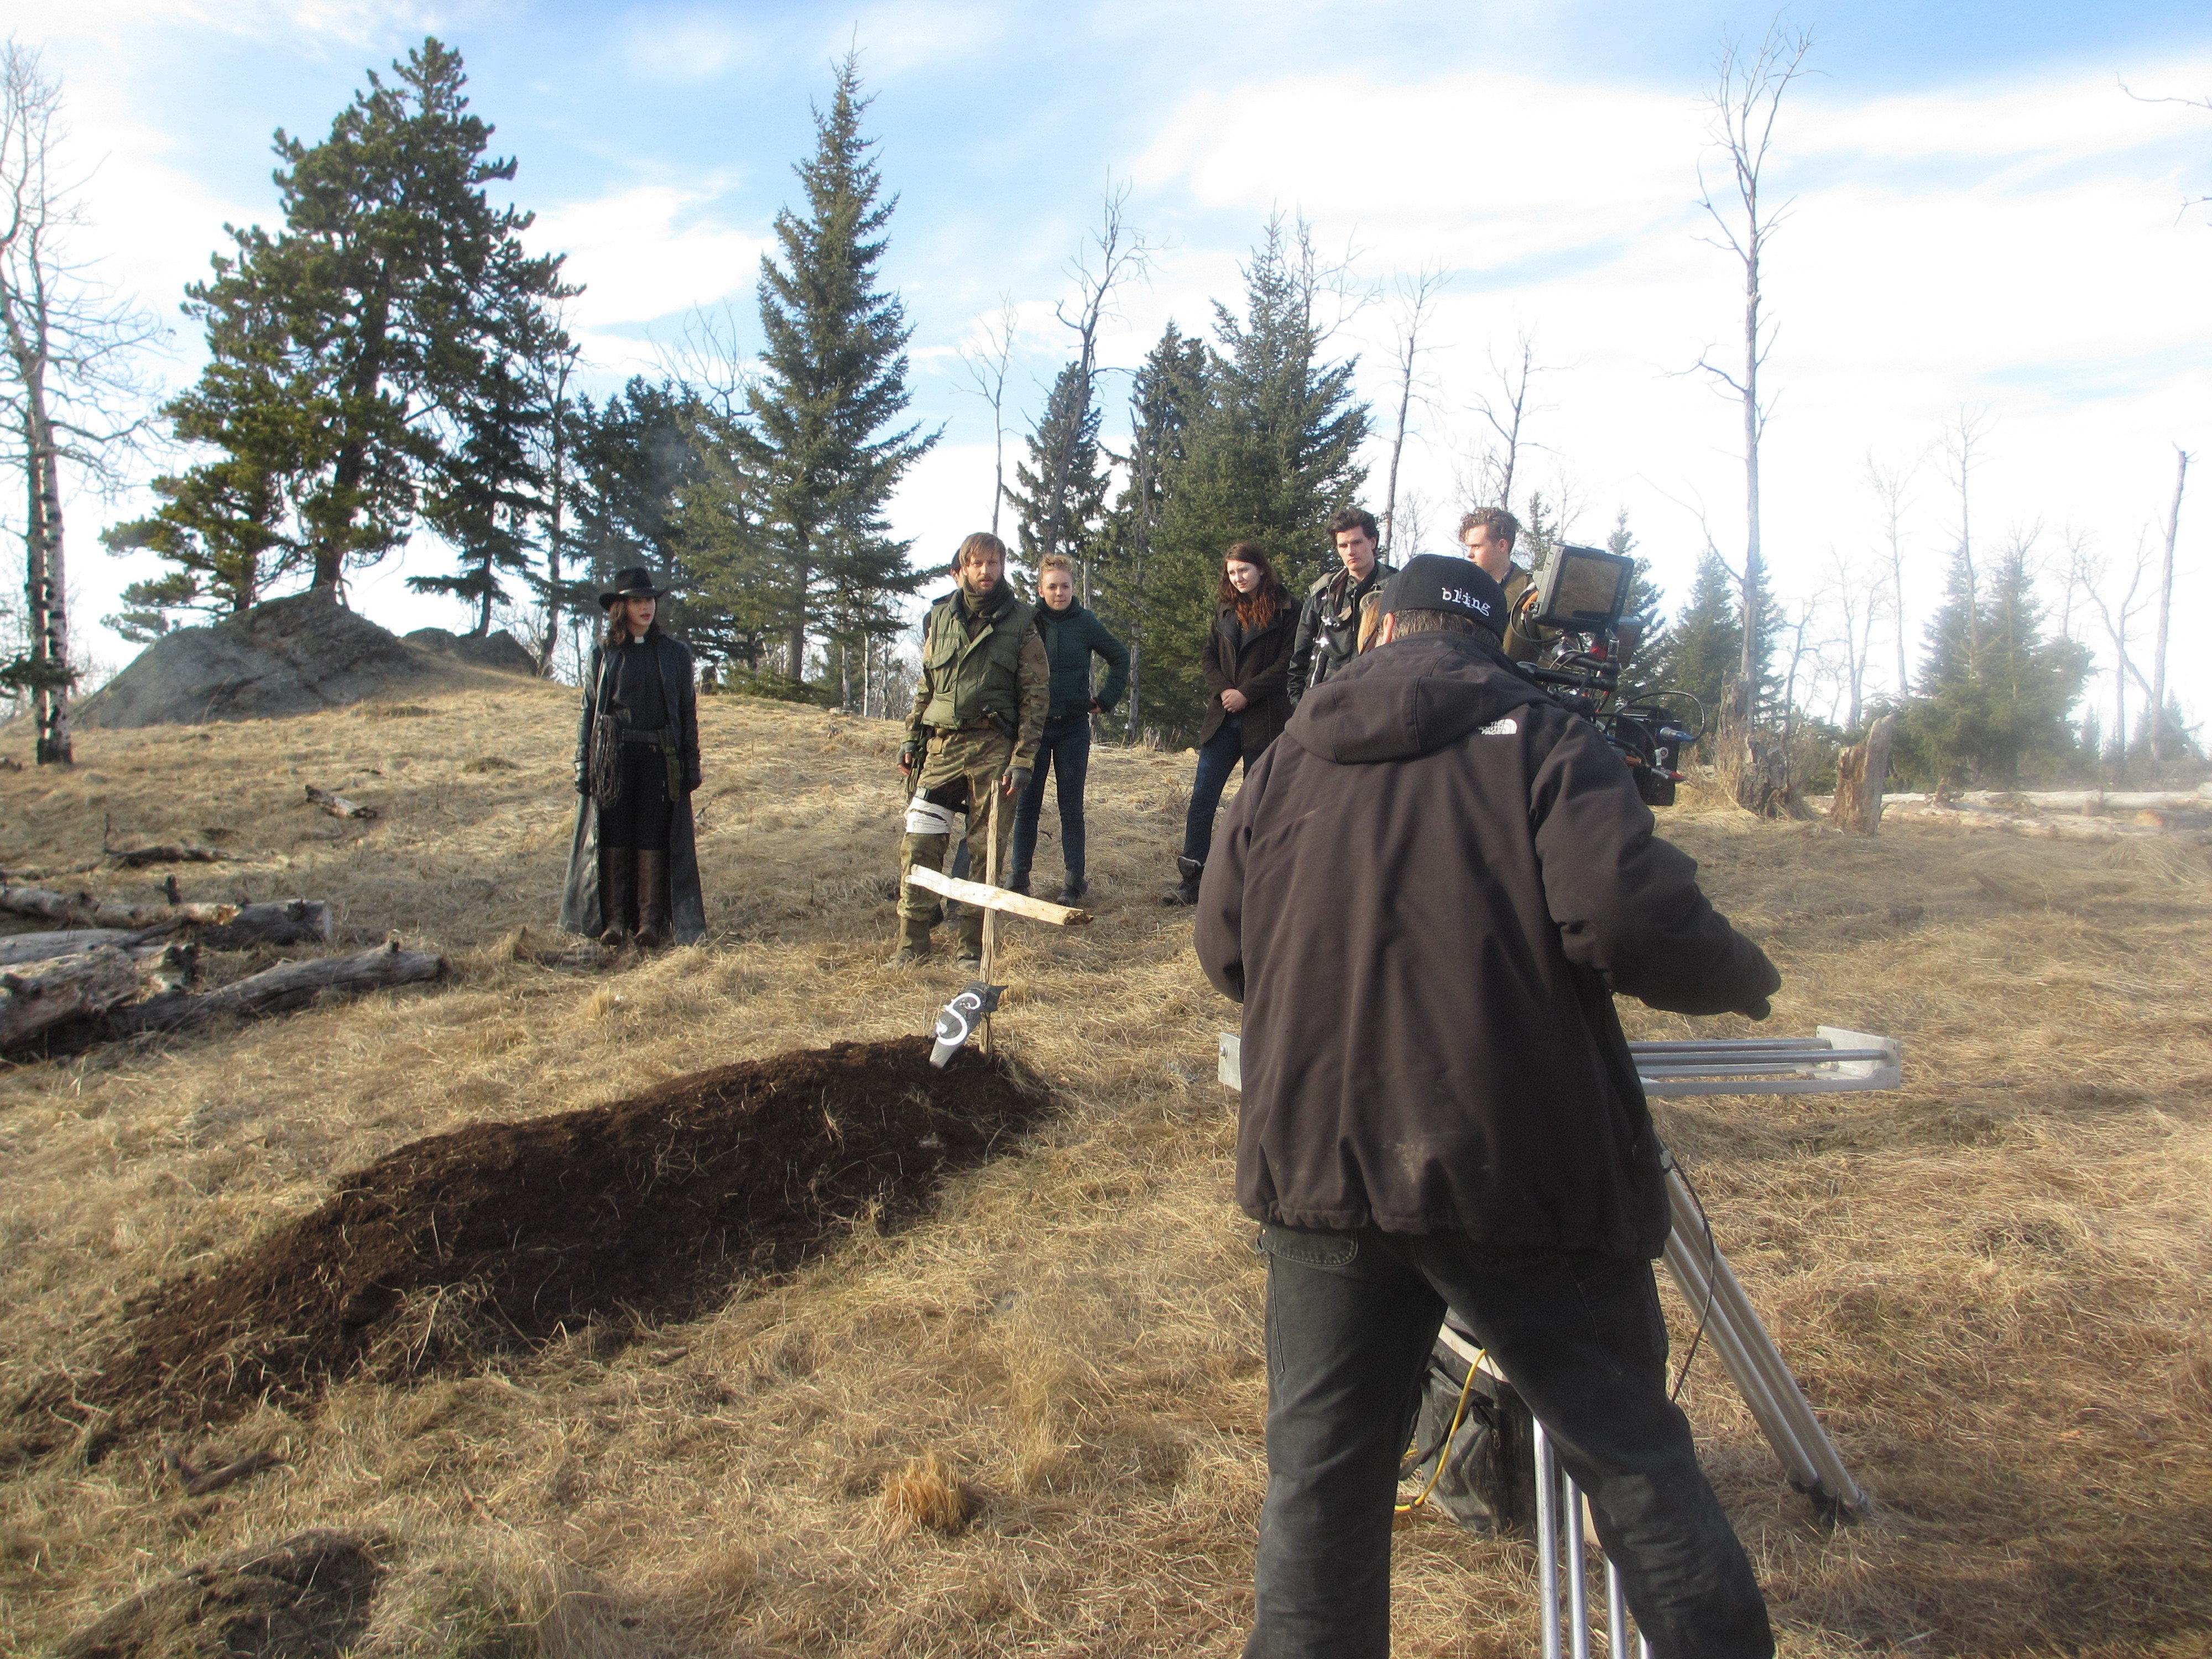 Shooting the end sequence at sunset. CL Ranch, west of Calgary, Alberta. April 14, 2014